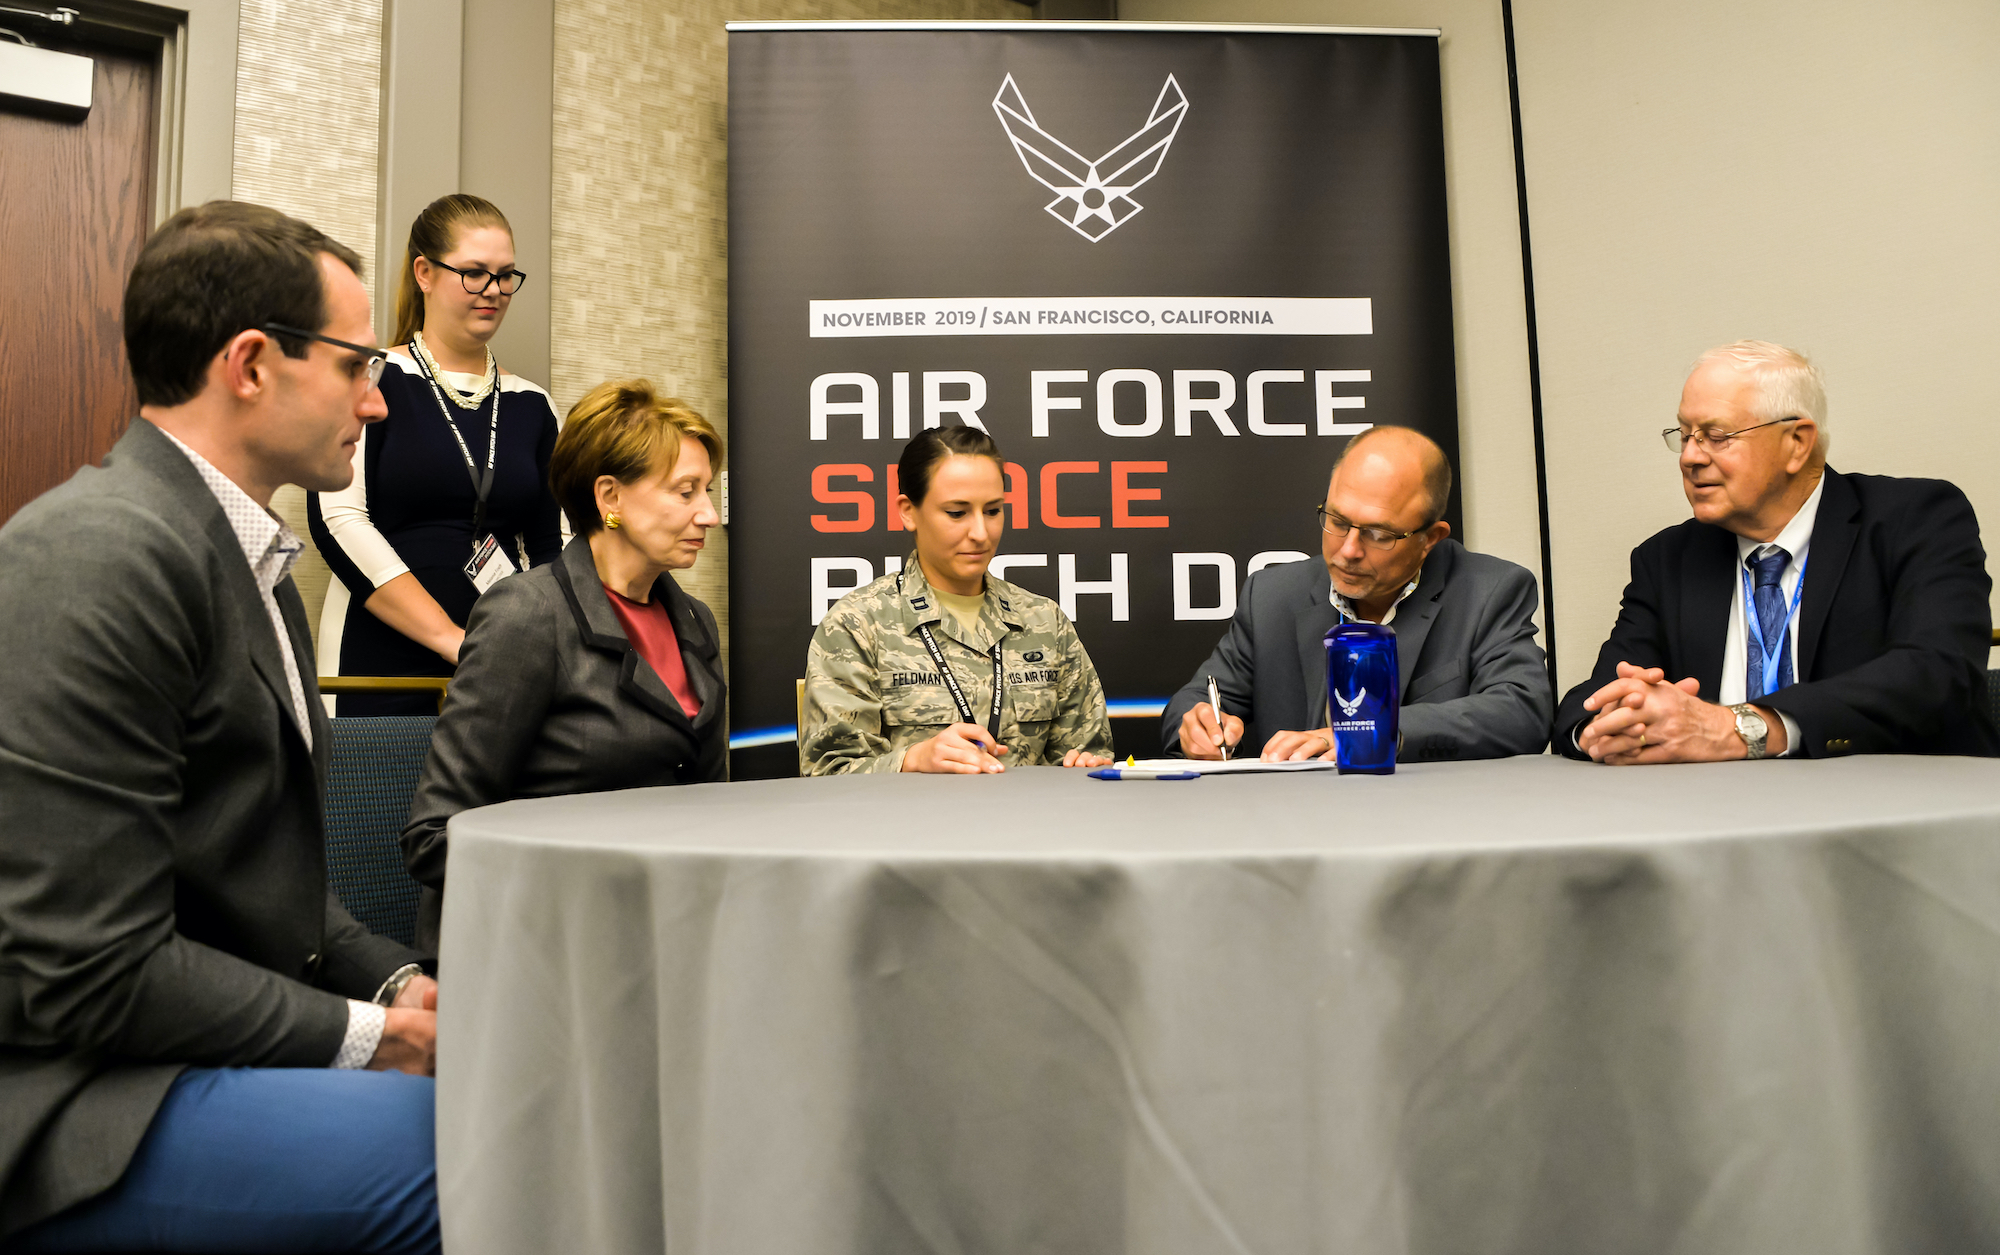 Air Force procurement executive calls for bold actions to boost space industry